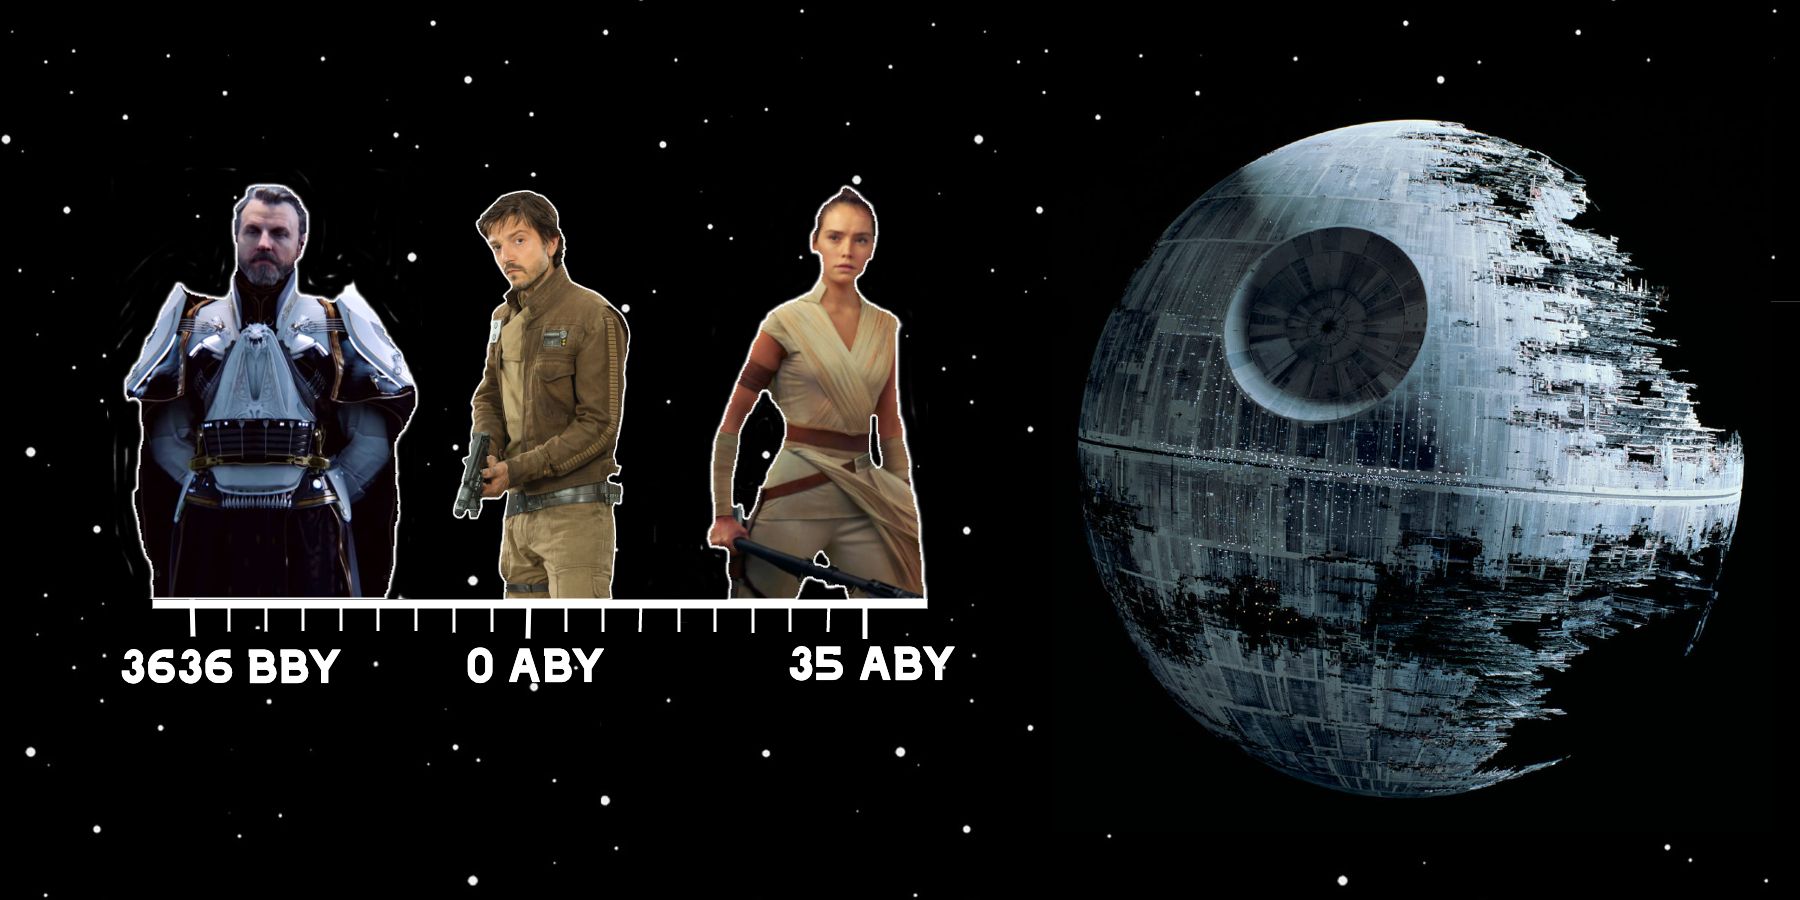 which year aby will star wars episode 9